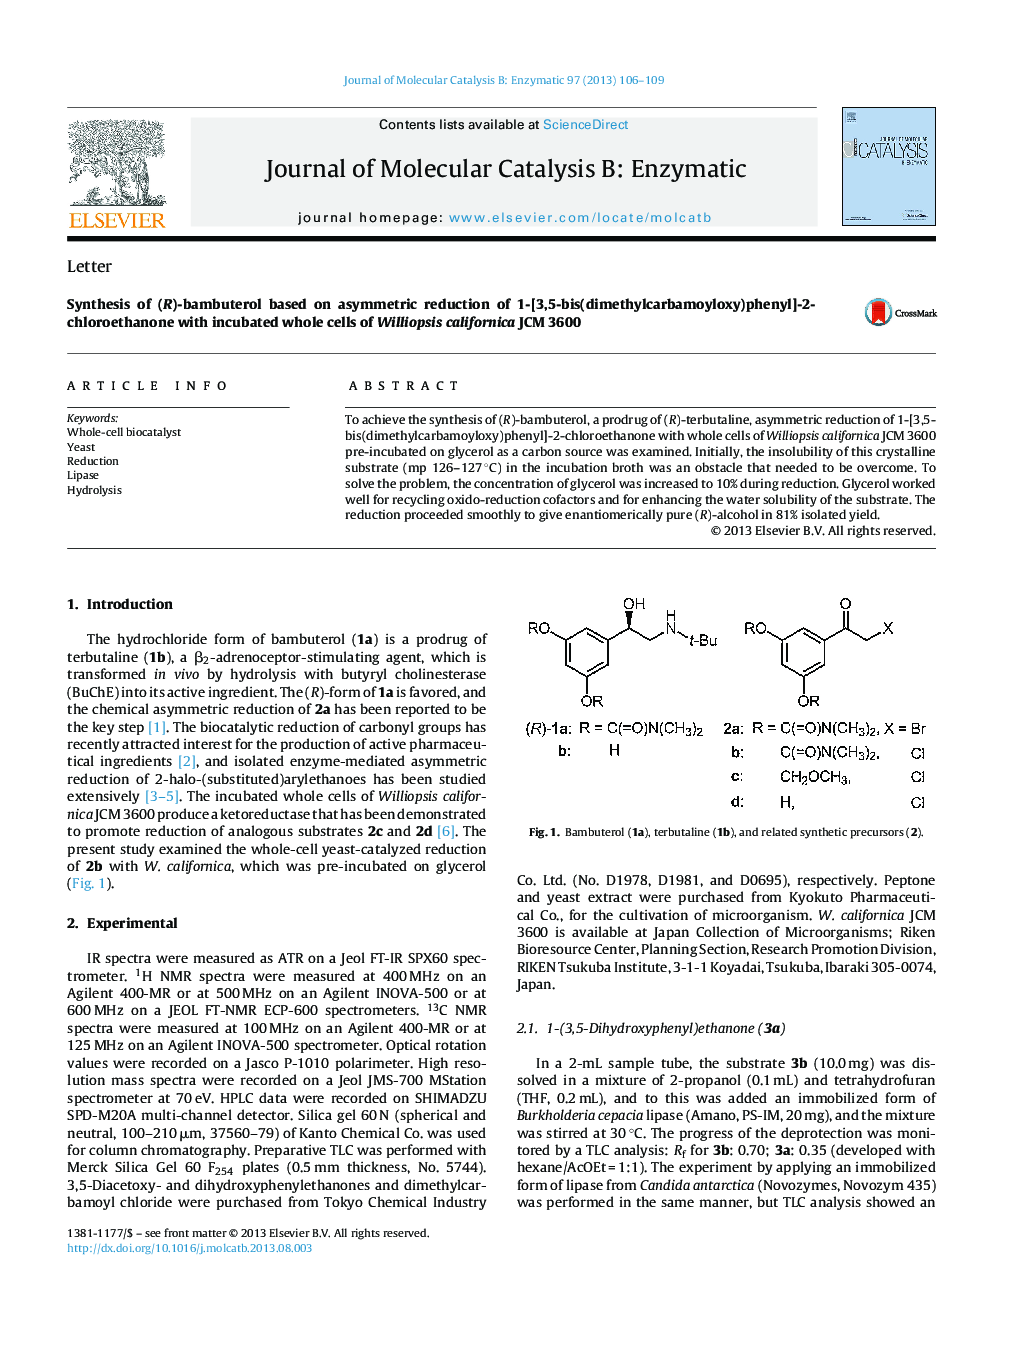 Synthesis of (R)-bambuterol based on asymmetric reduction of 1-[3,5-bis(dimethylcarbamoyloxy)phenyl]-2-chloroethanone with incubated whole cells of Williopsis californica JCM 3600